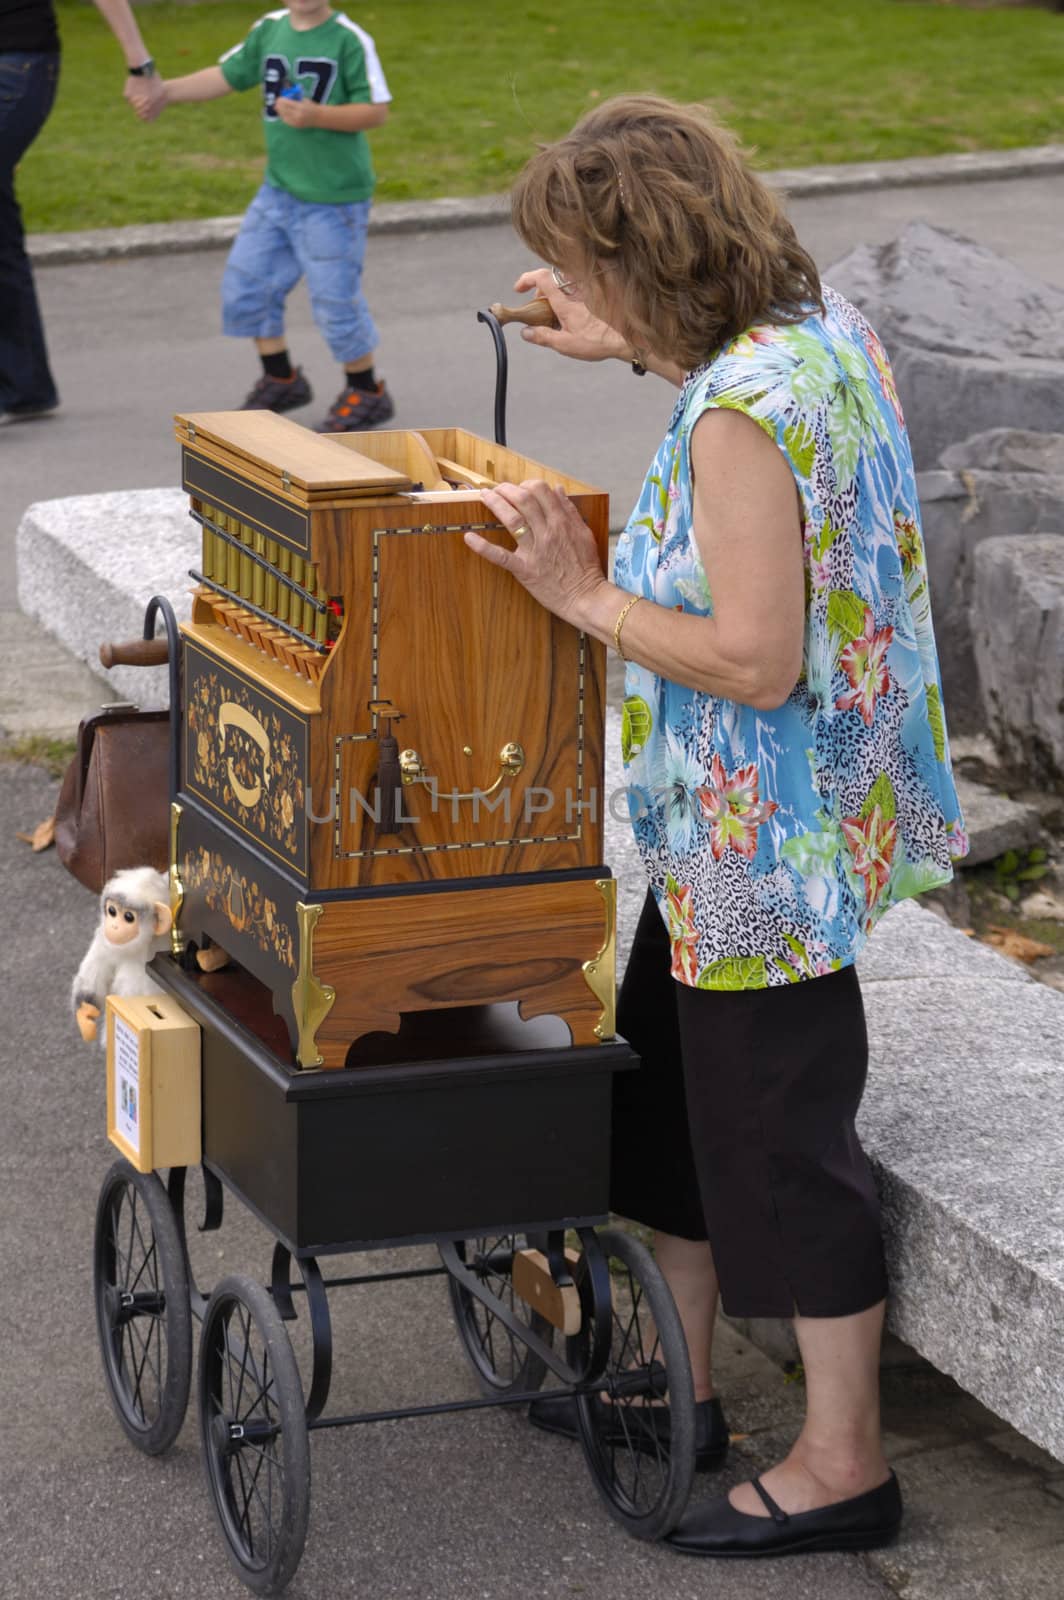 A woman barrel organ player, complete with monkey, playing her music as a man hurries by with his son (who wants to stop and listen).